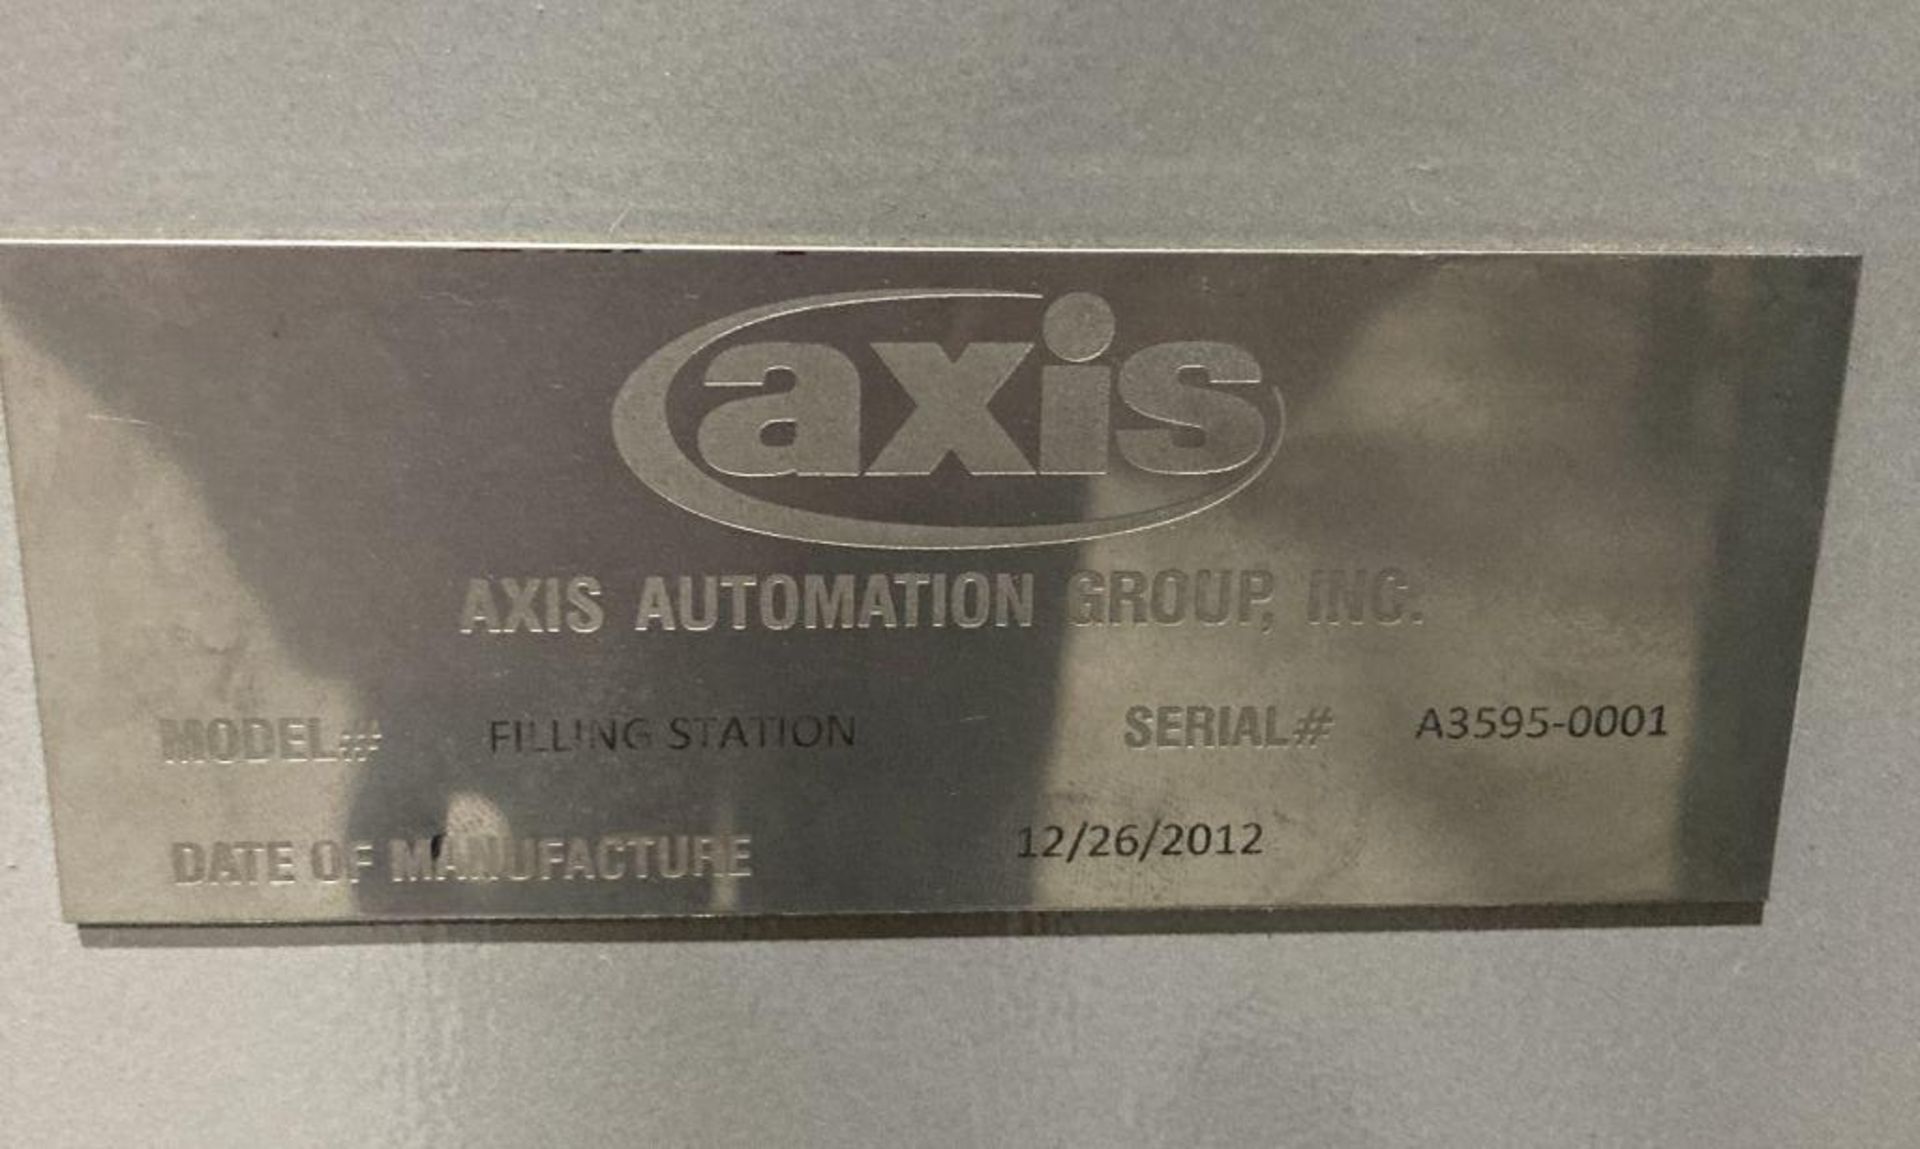 Axis Automation Group Filling Station - Image 8 of 9